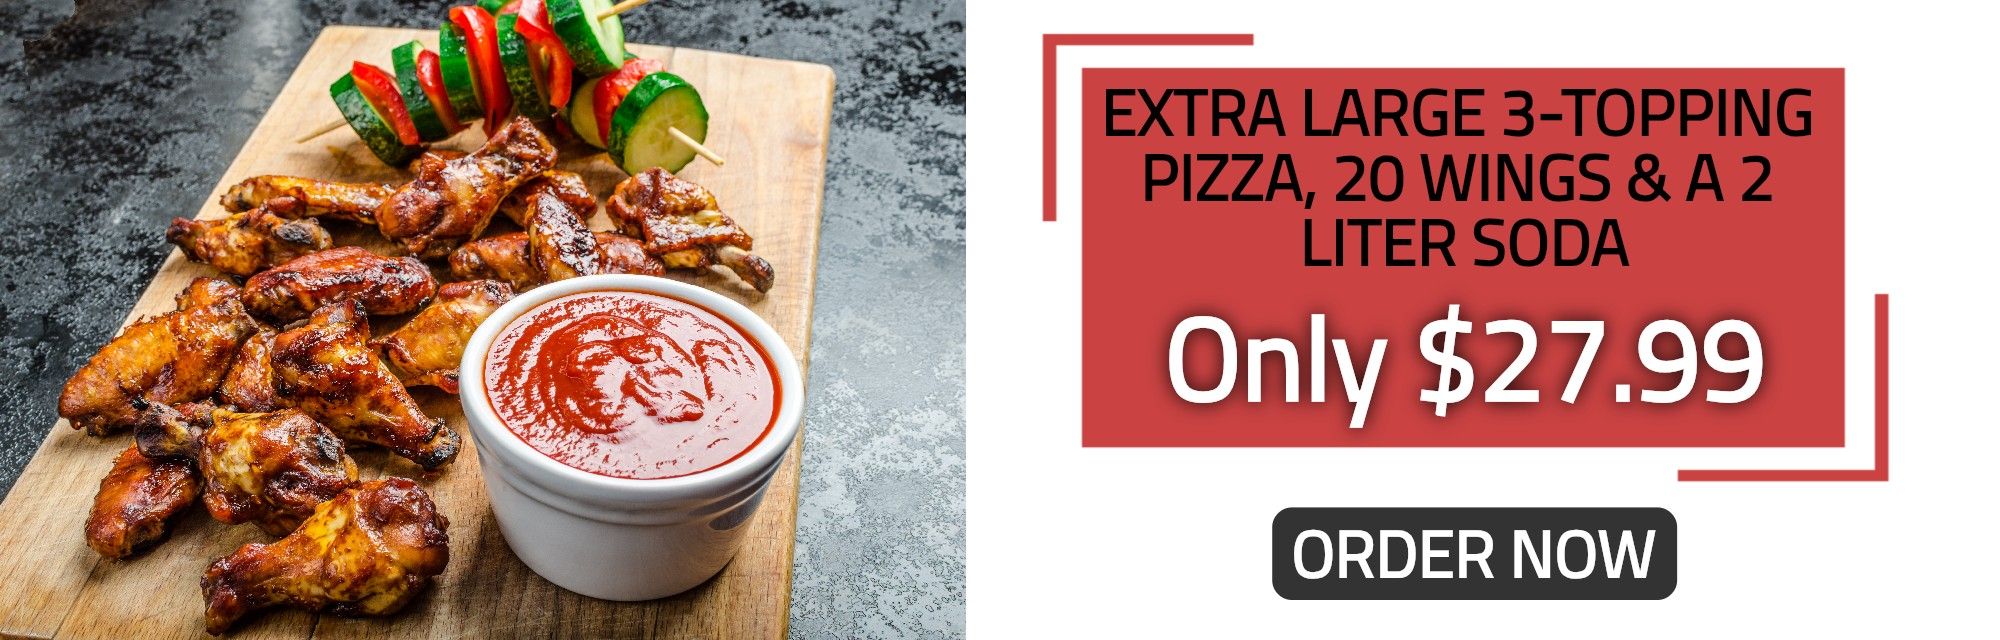 Extra Large 3-Topping Pizza, 20 Wings & 2 liter soda only $27.99